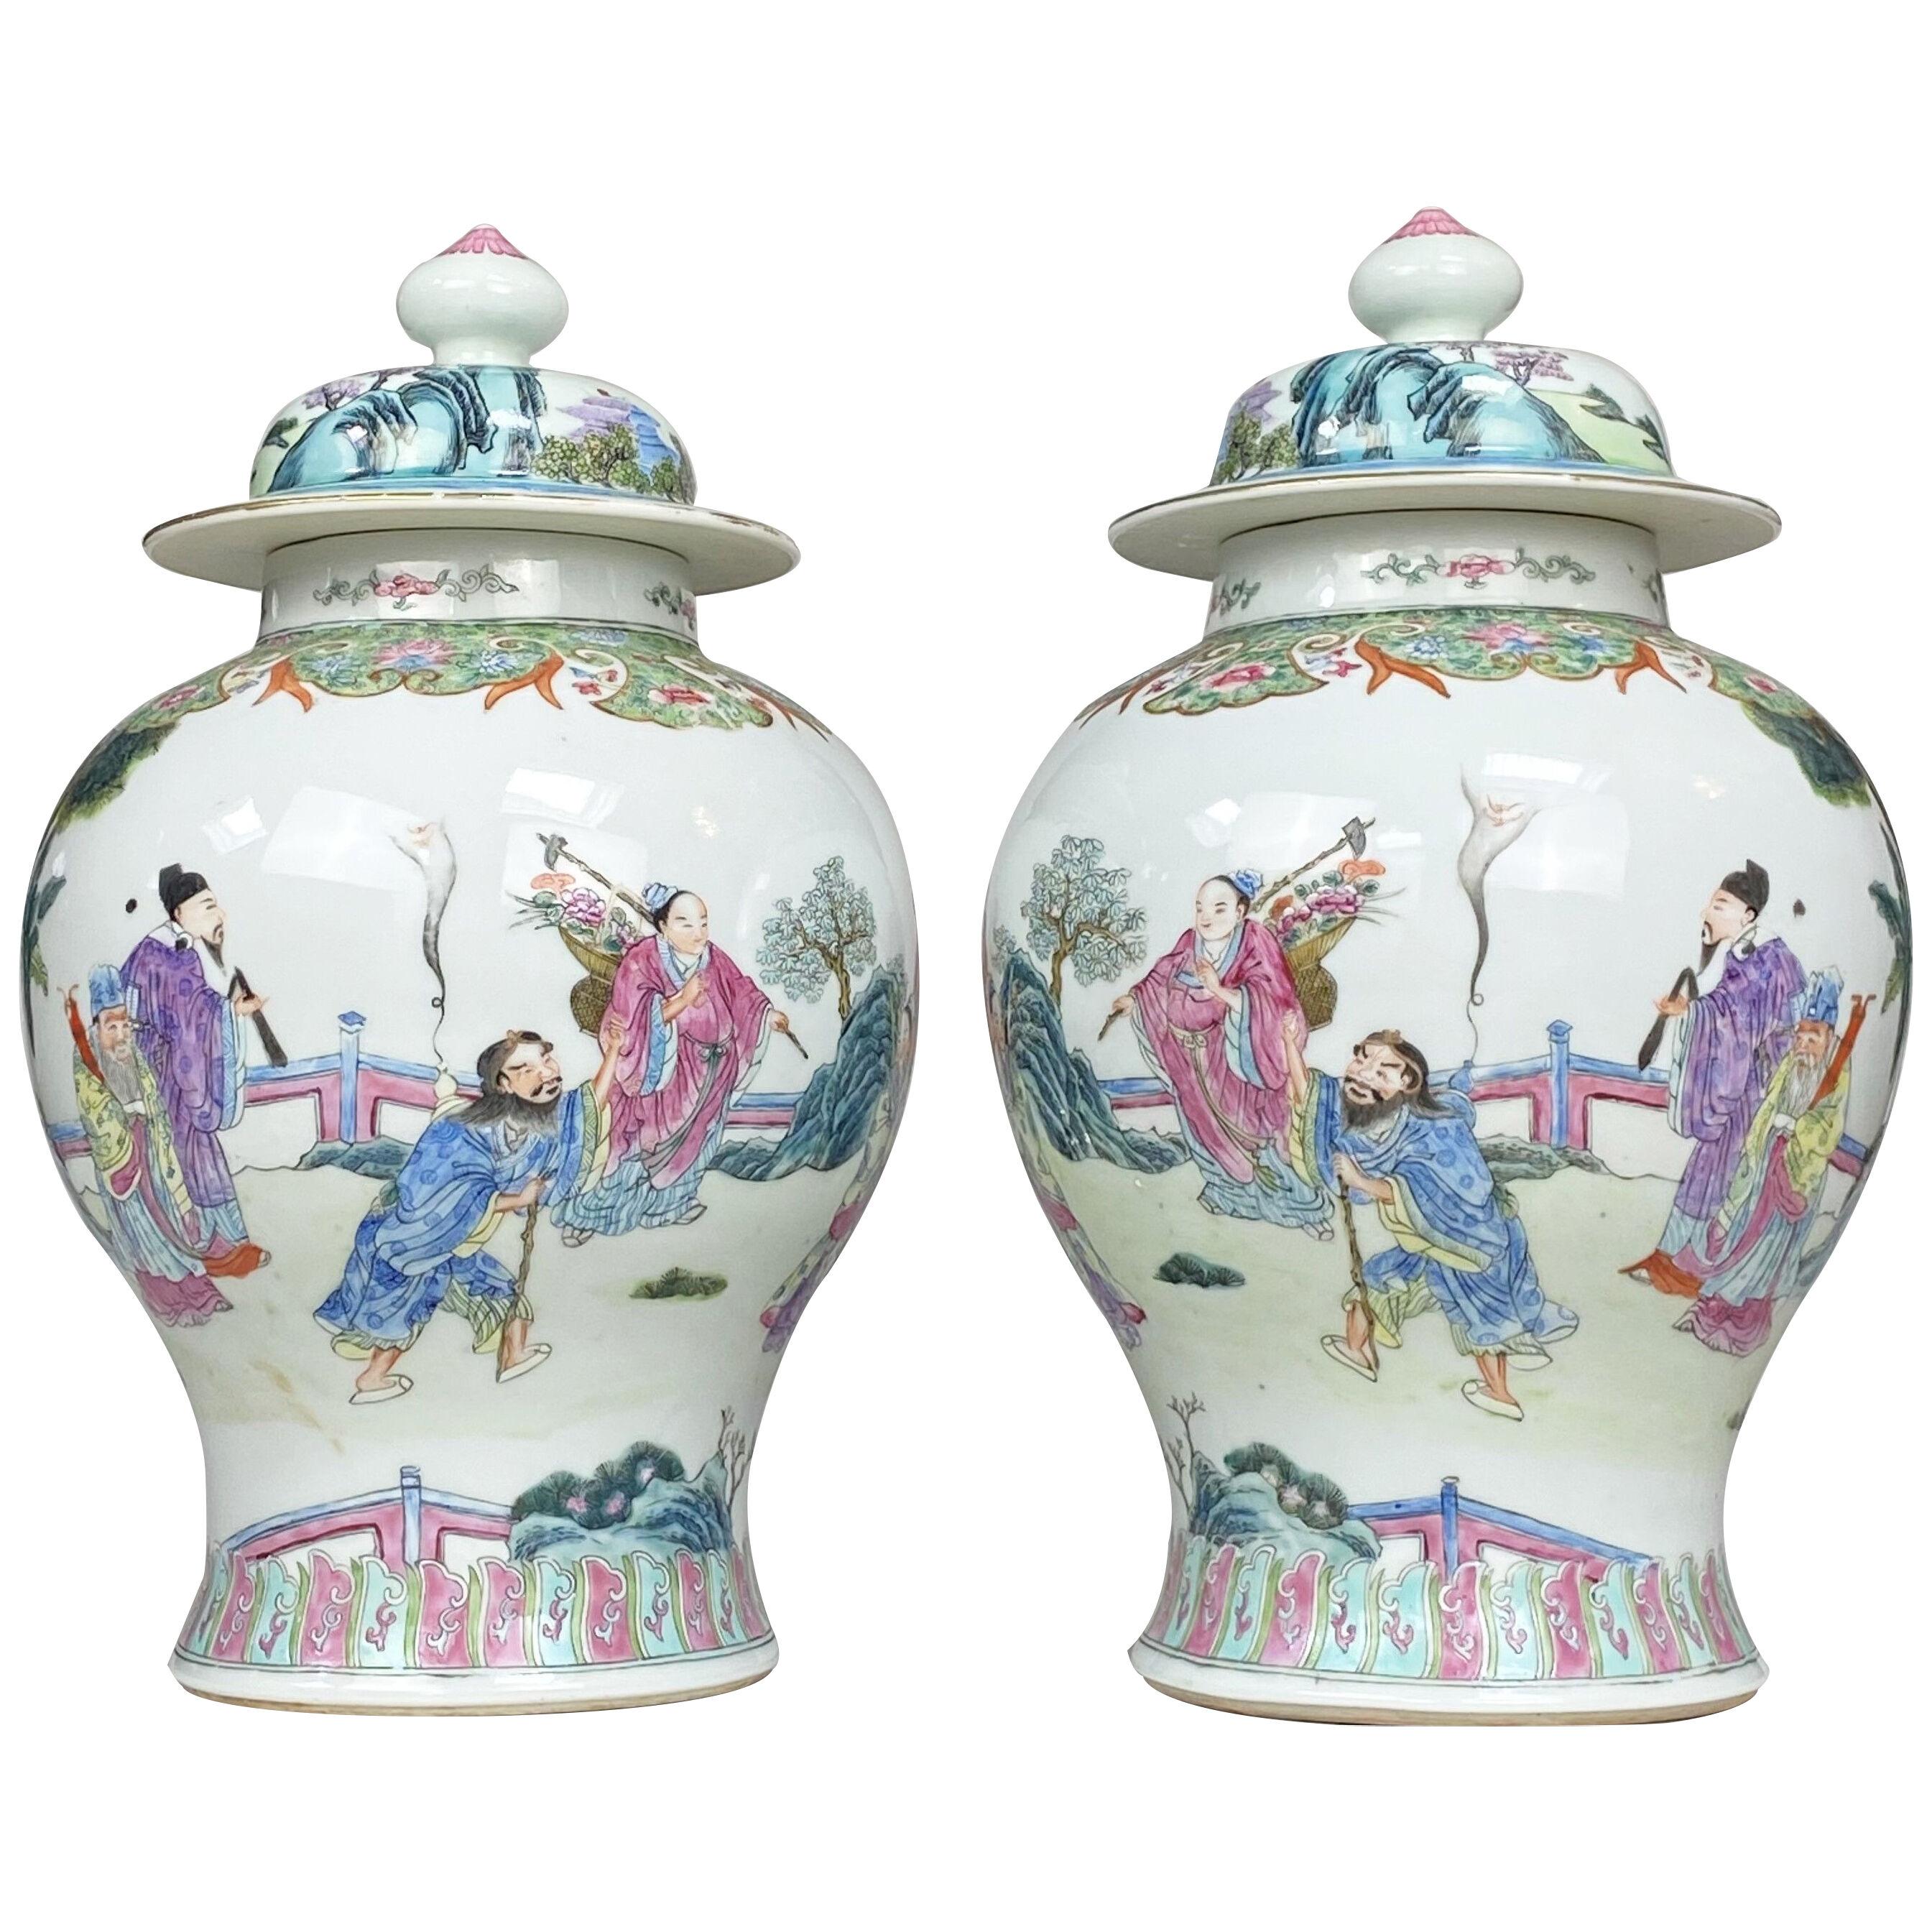 A charming pair of 19th Century Chinese porcelain jars and covers